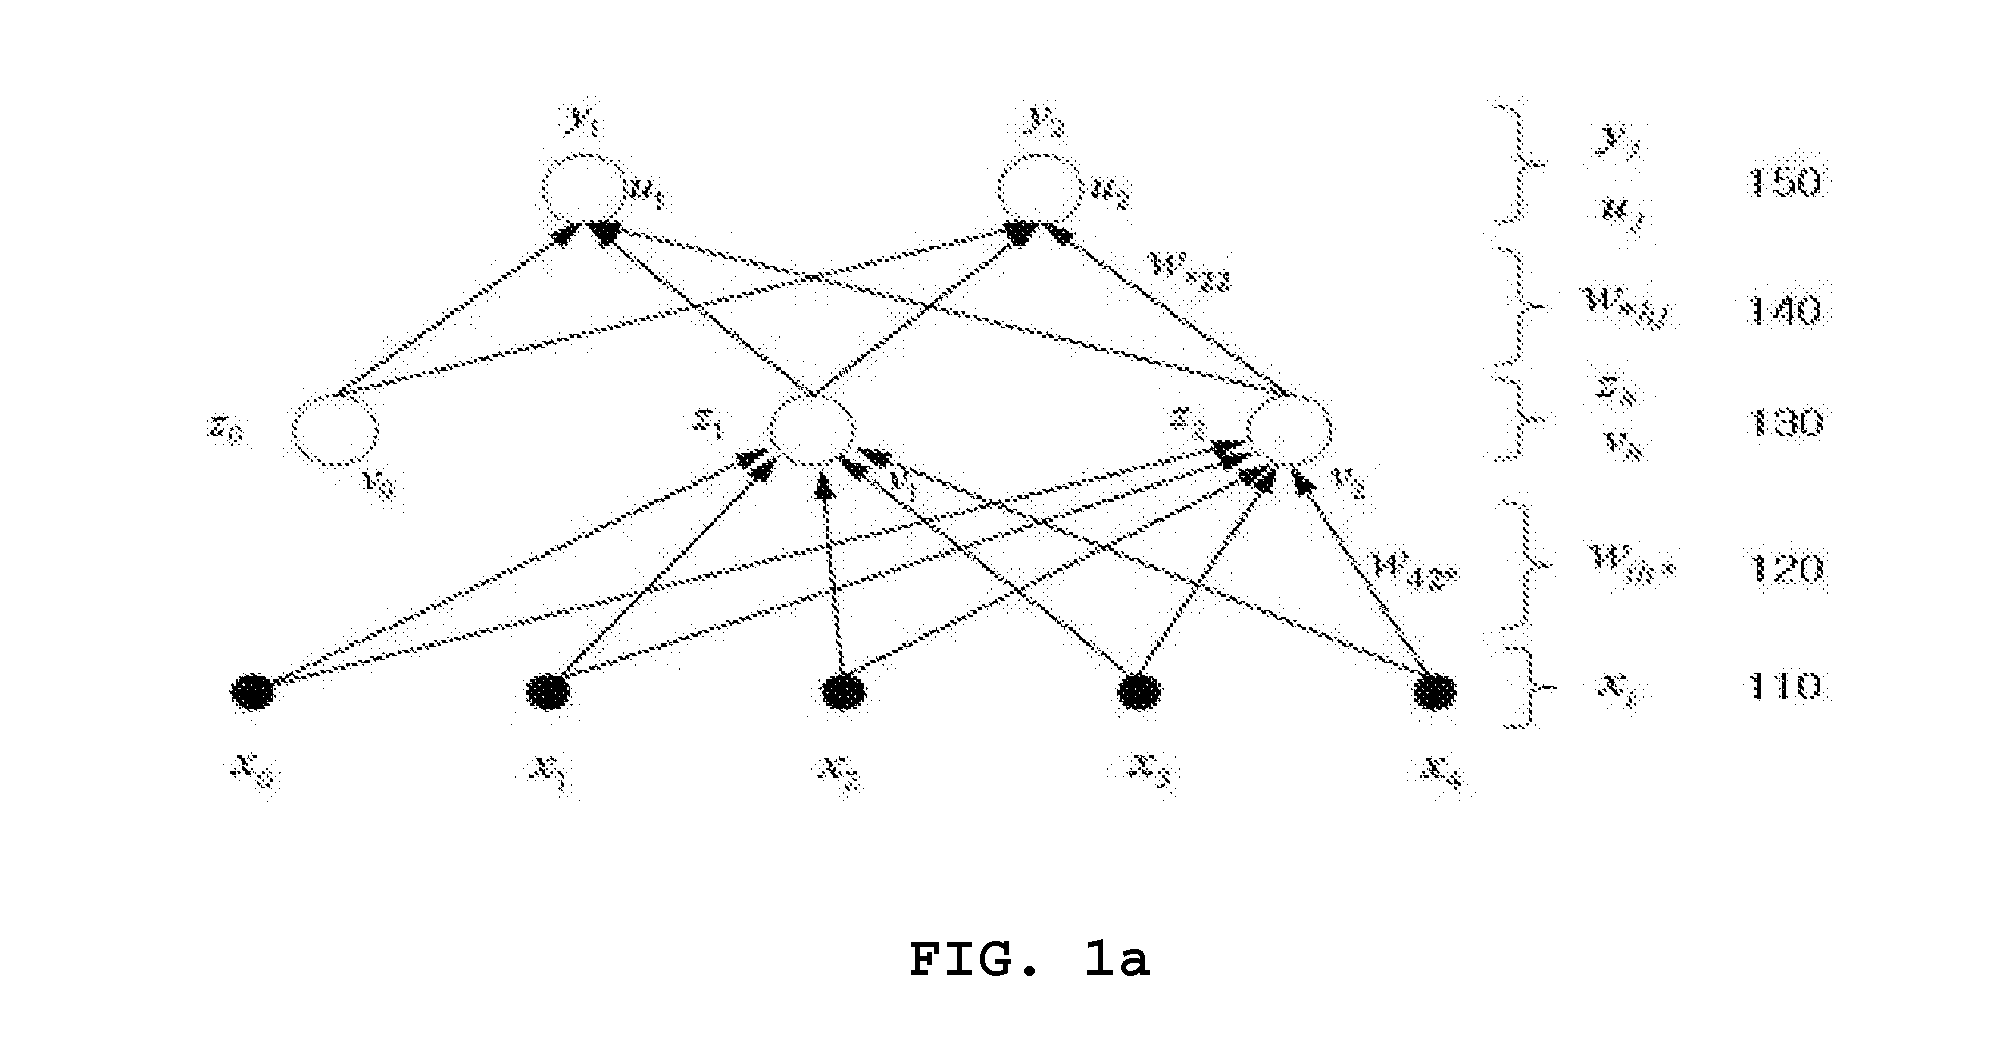 Separate Learning System and Method Using Two-Layered Neural Network Having Target Values for Hidden Nodes